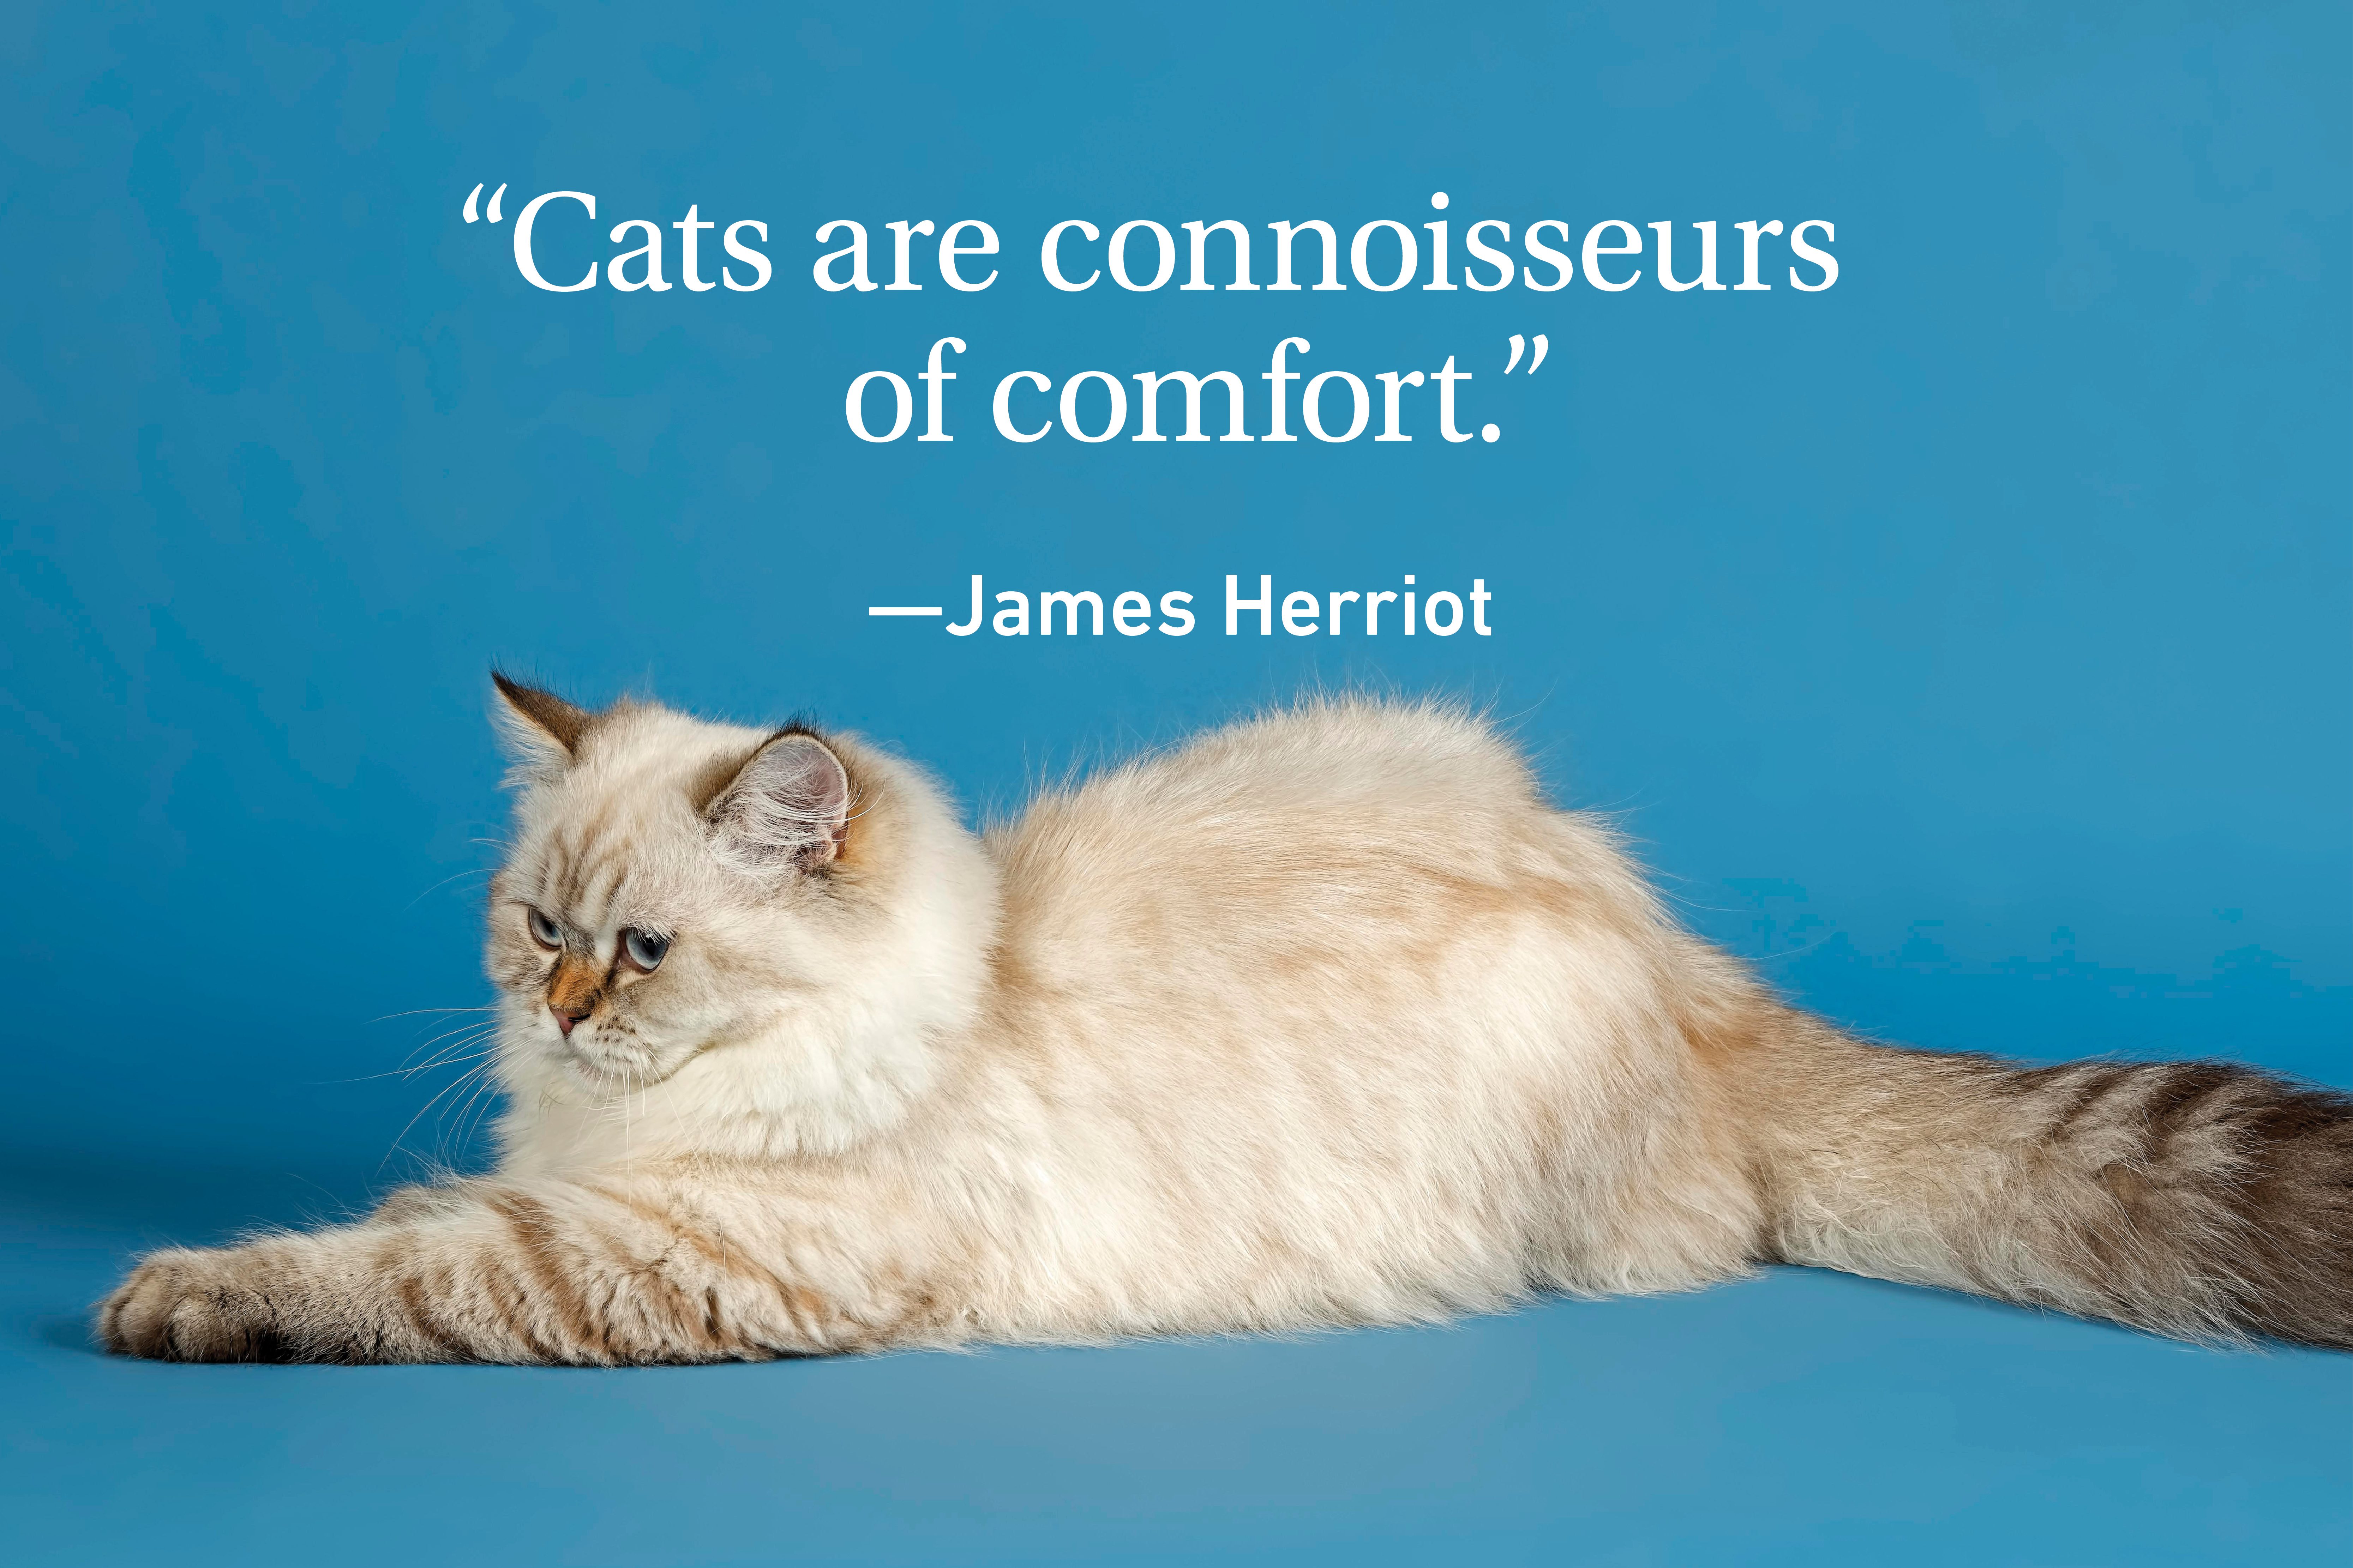 Cat laying down on teal background with a quote above about cats